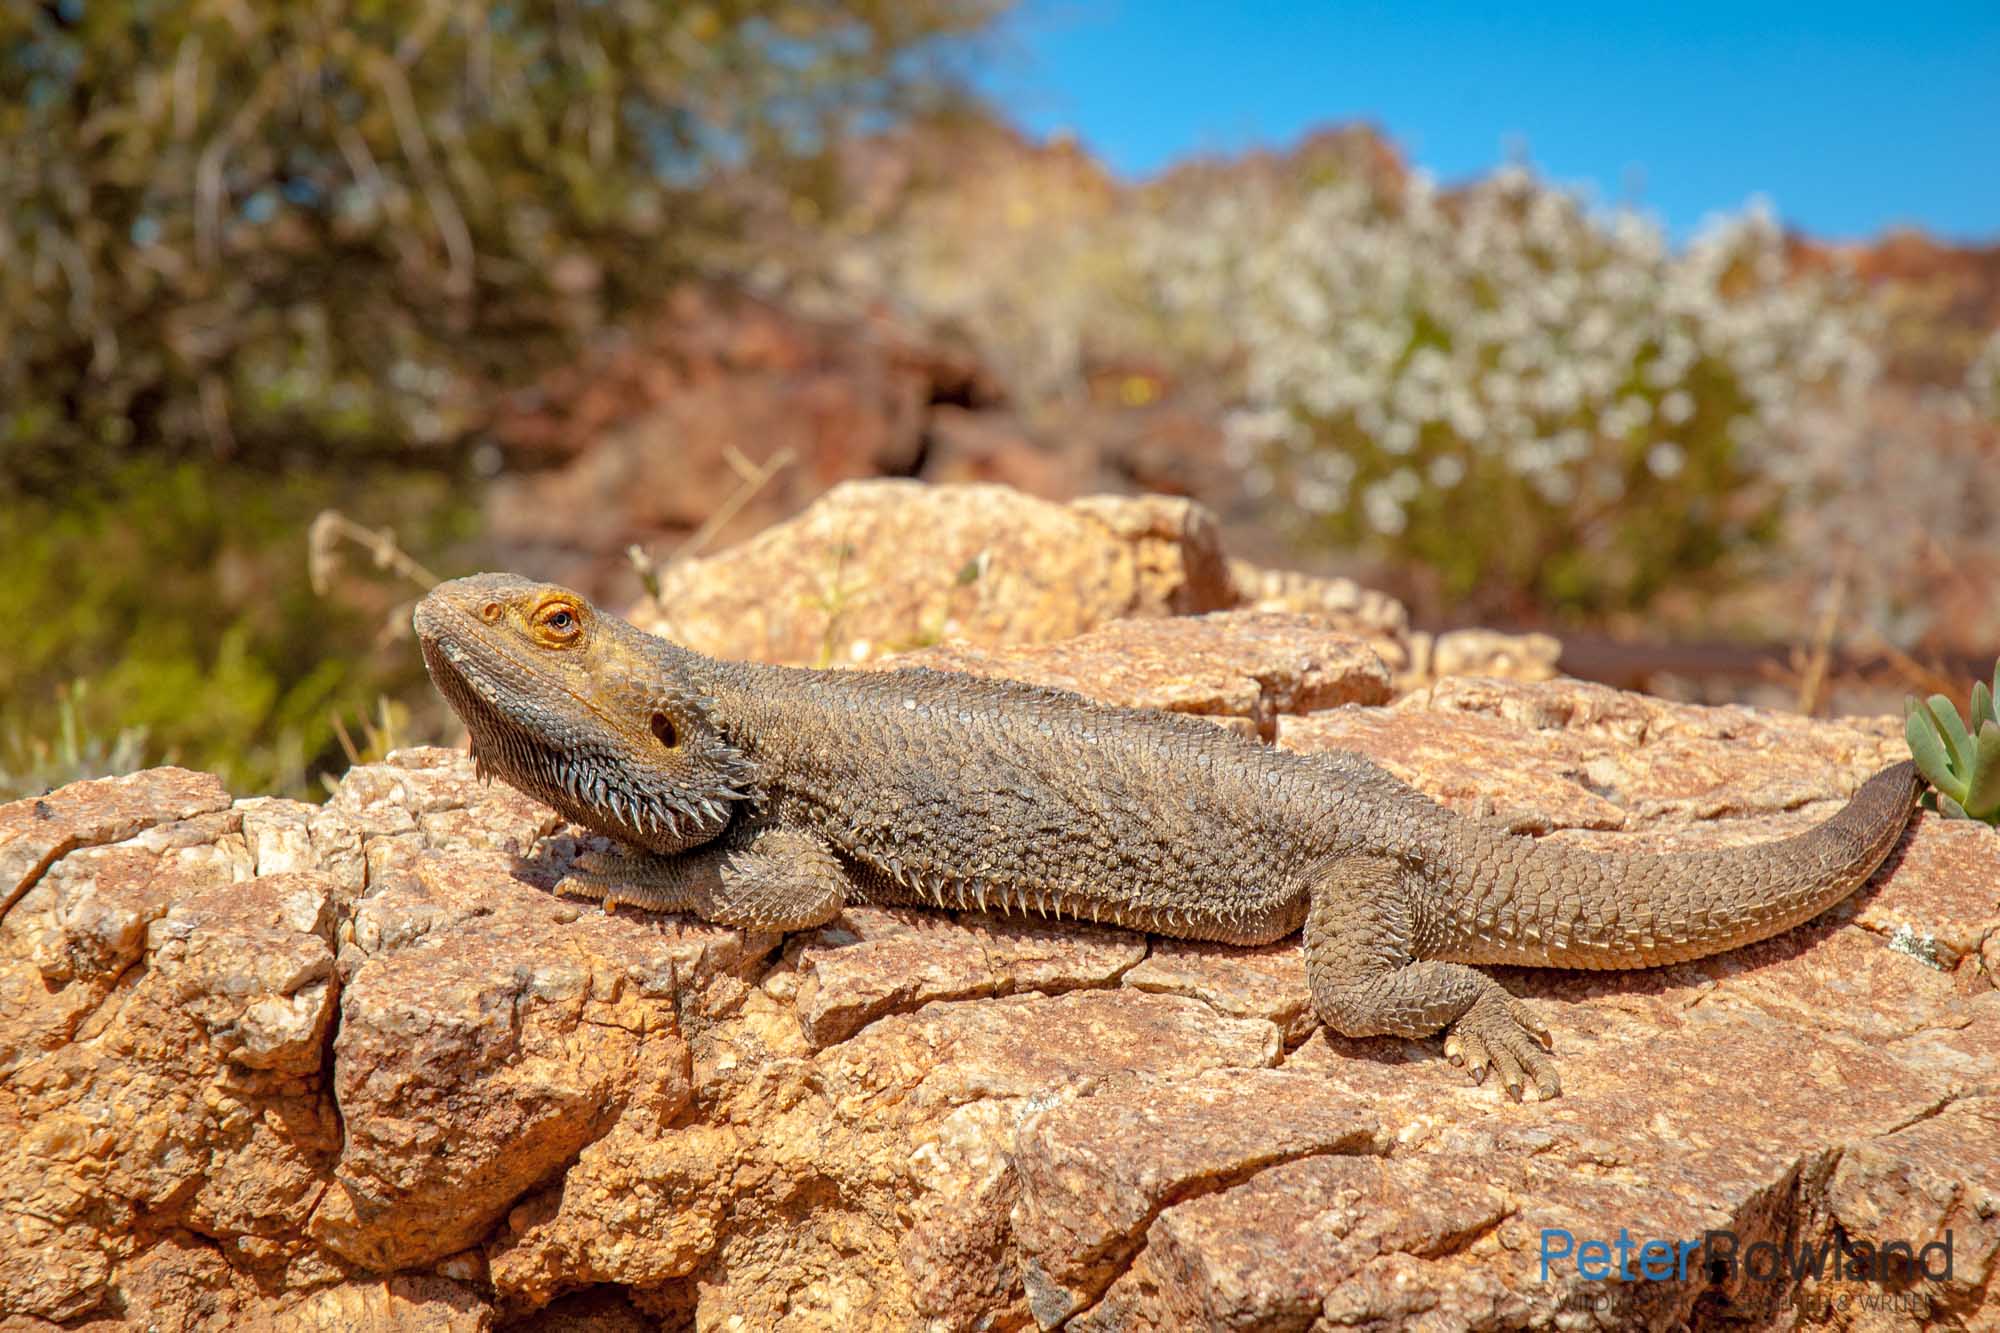 Central Bearded Dragon basking on rock with flowering shrubs in background